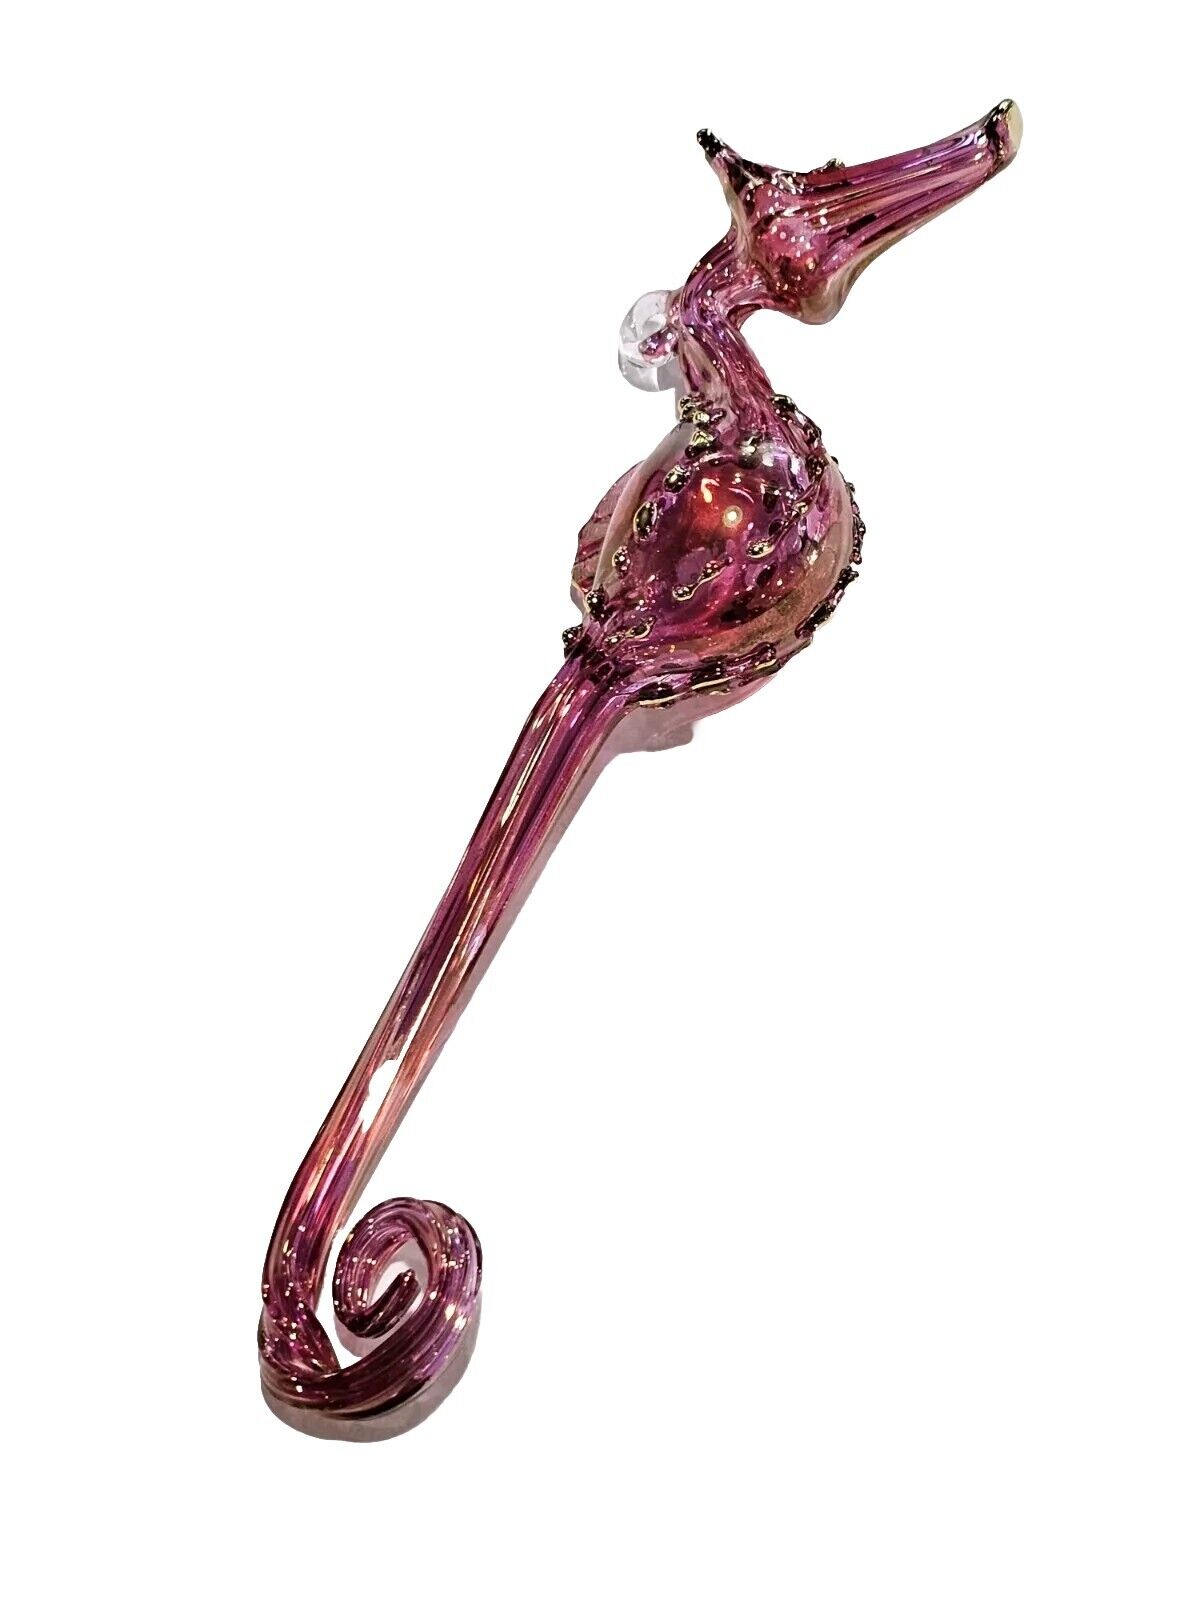 Egyptian Hand Blown Glass SEAHORSE Ornament MADE IN EGYPT